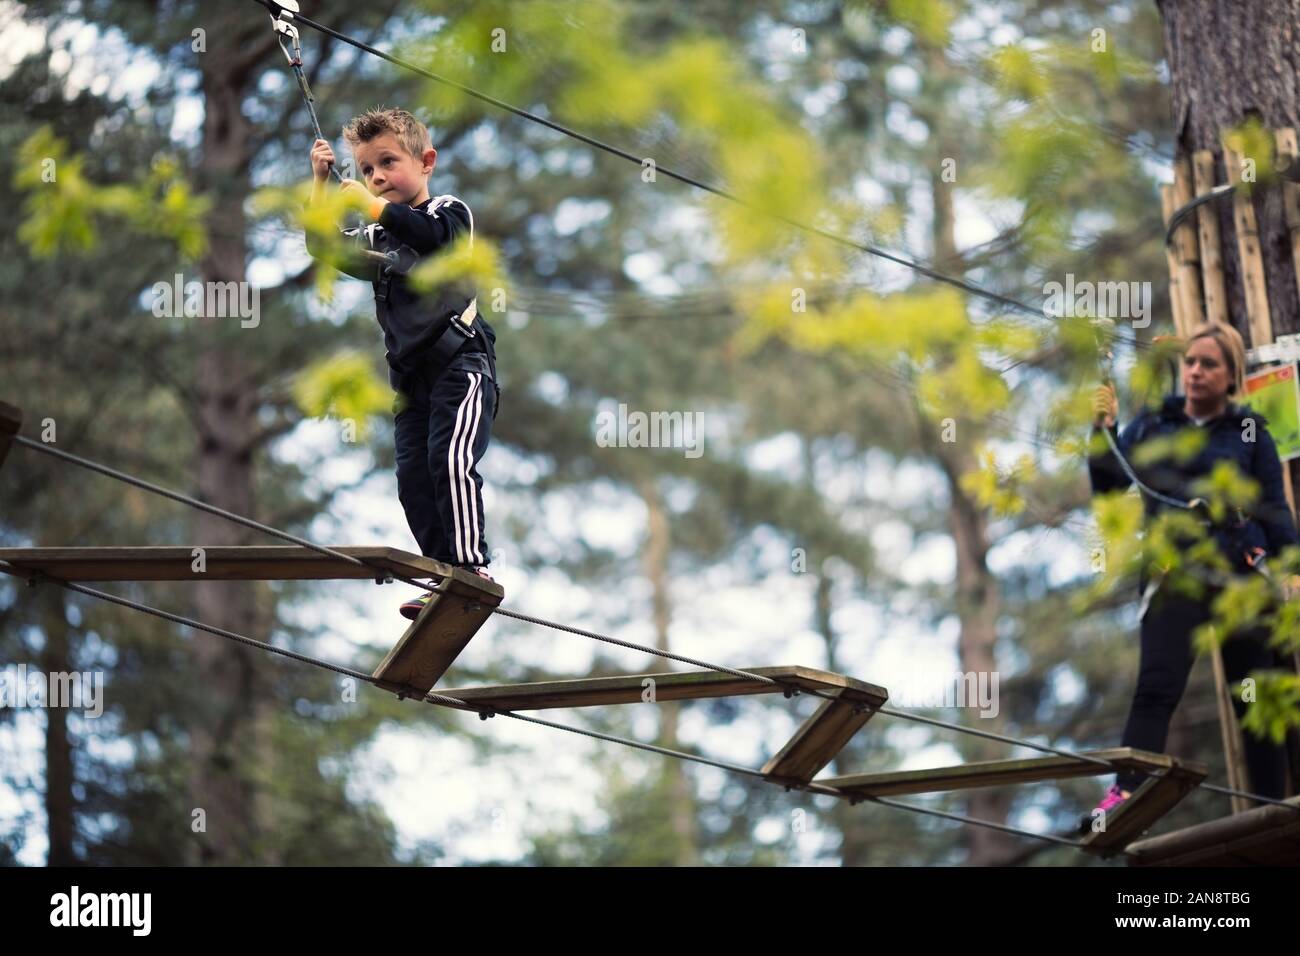 Young boy on high ropes Stock Photo